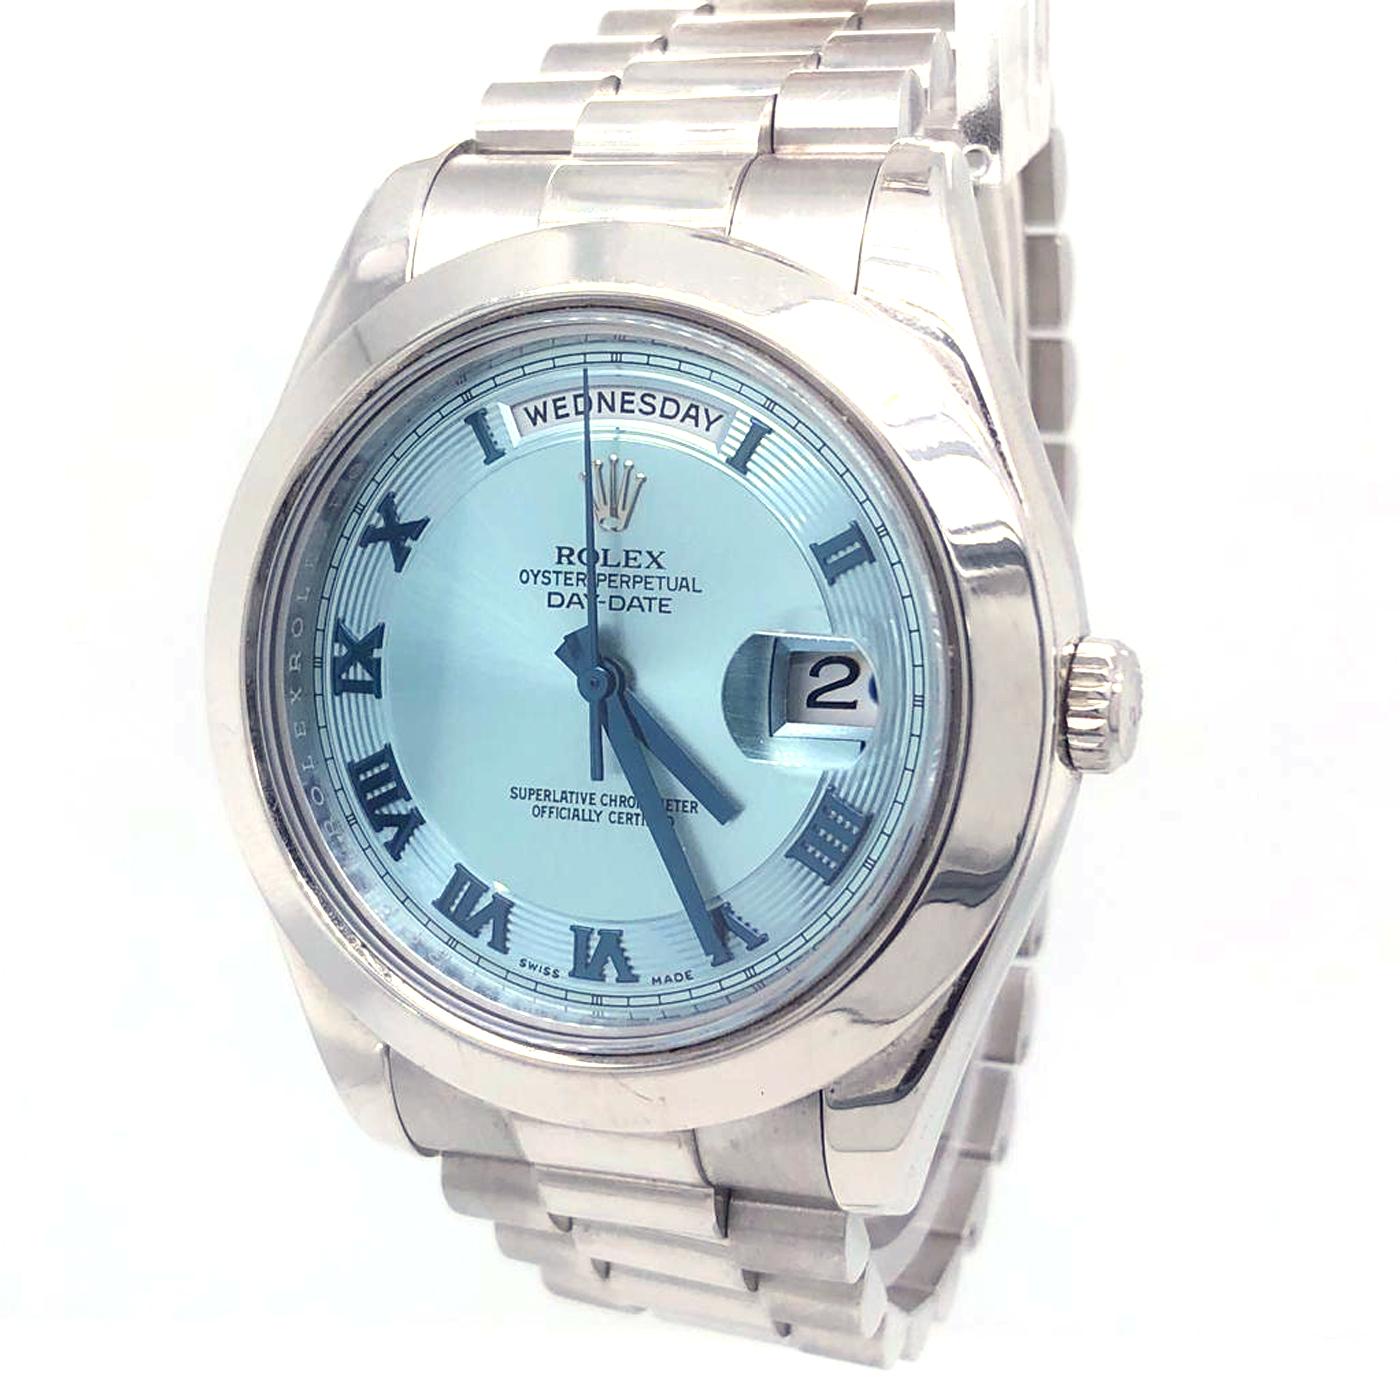 Day Date II Platinum 218206 Full Set - Full platinum, President bracelet, sky blue sunburst dial with applied roman numeral indexes, day / date indicator, sapphire glass, screw down crown, chronometer certified automatic movement (COSC). With